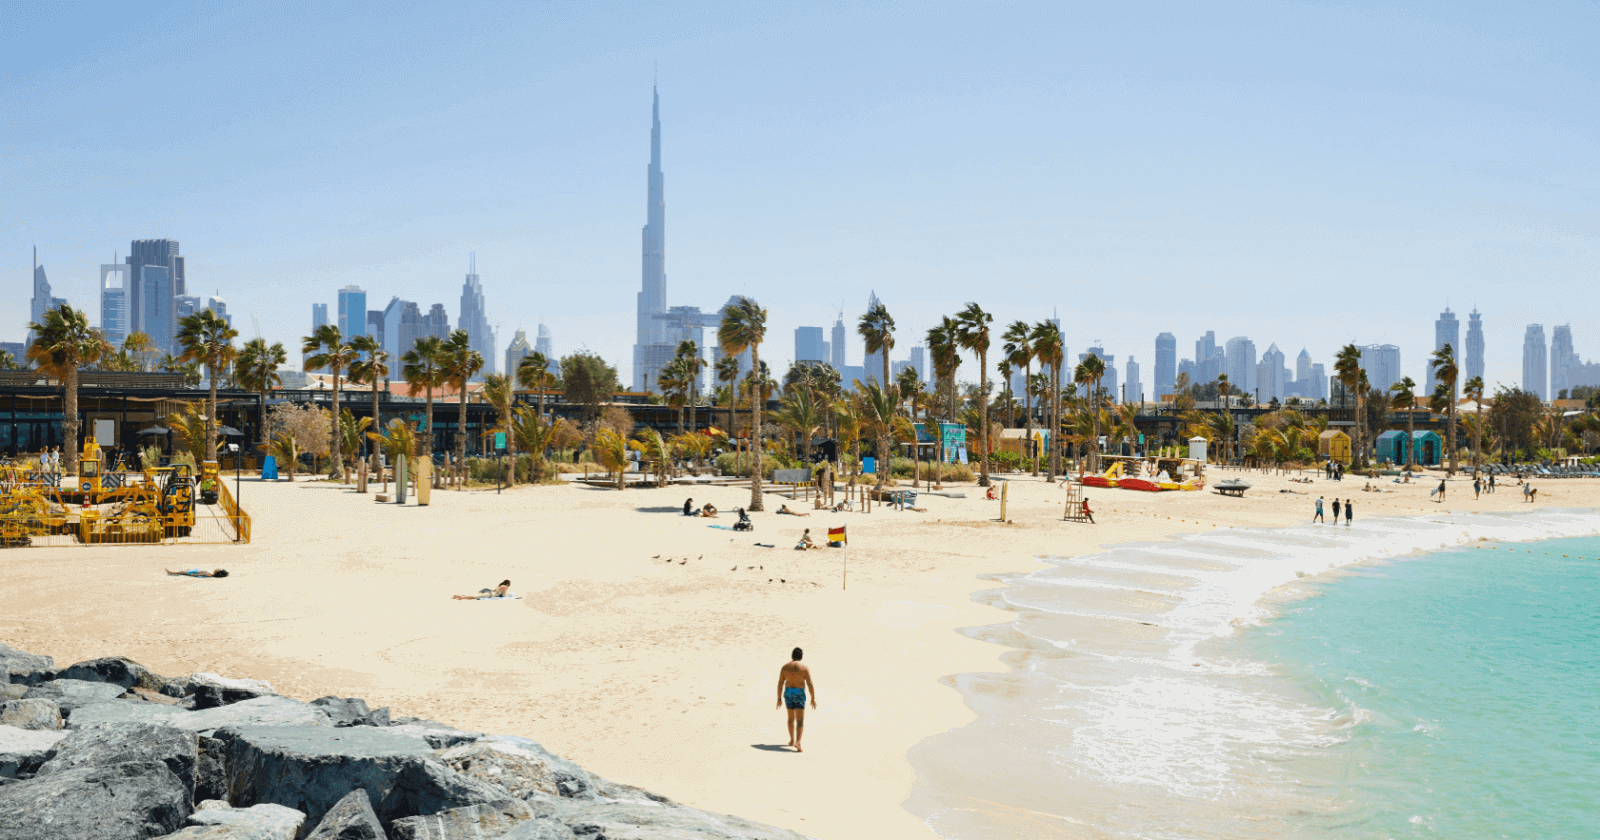 The Best Theme Parks in Abu Dhabi: Complete Guide